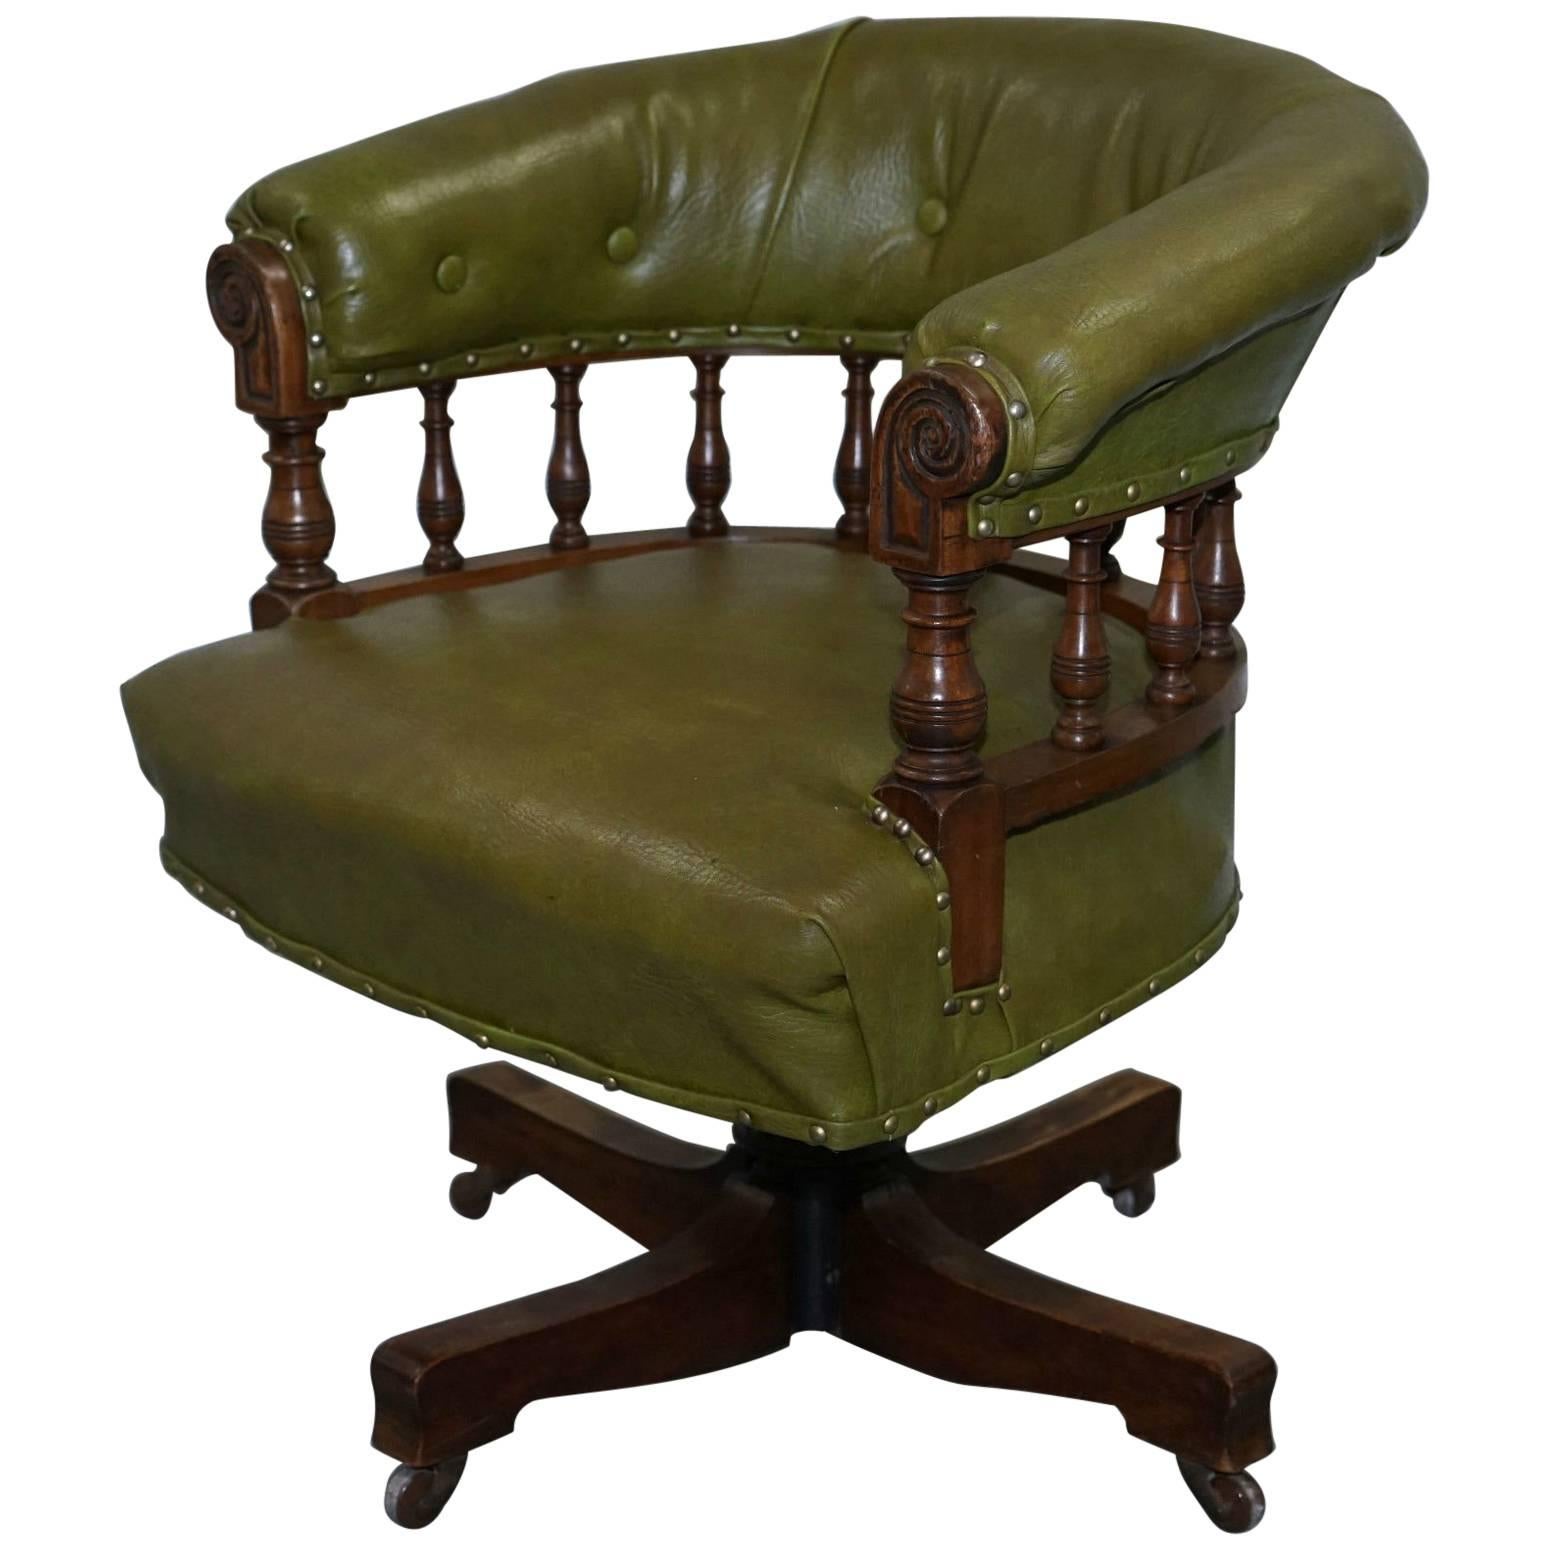 Rare & Genuine Victorian, circa 1860 Chesterfield Buttoned Captains Office Chair